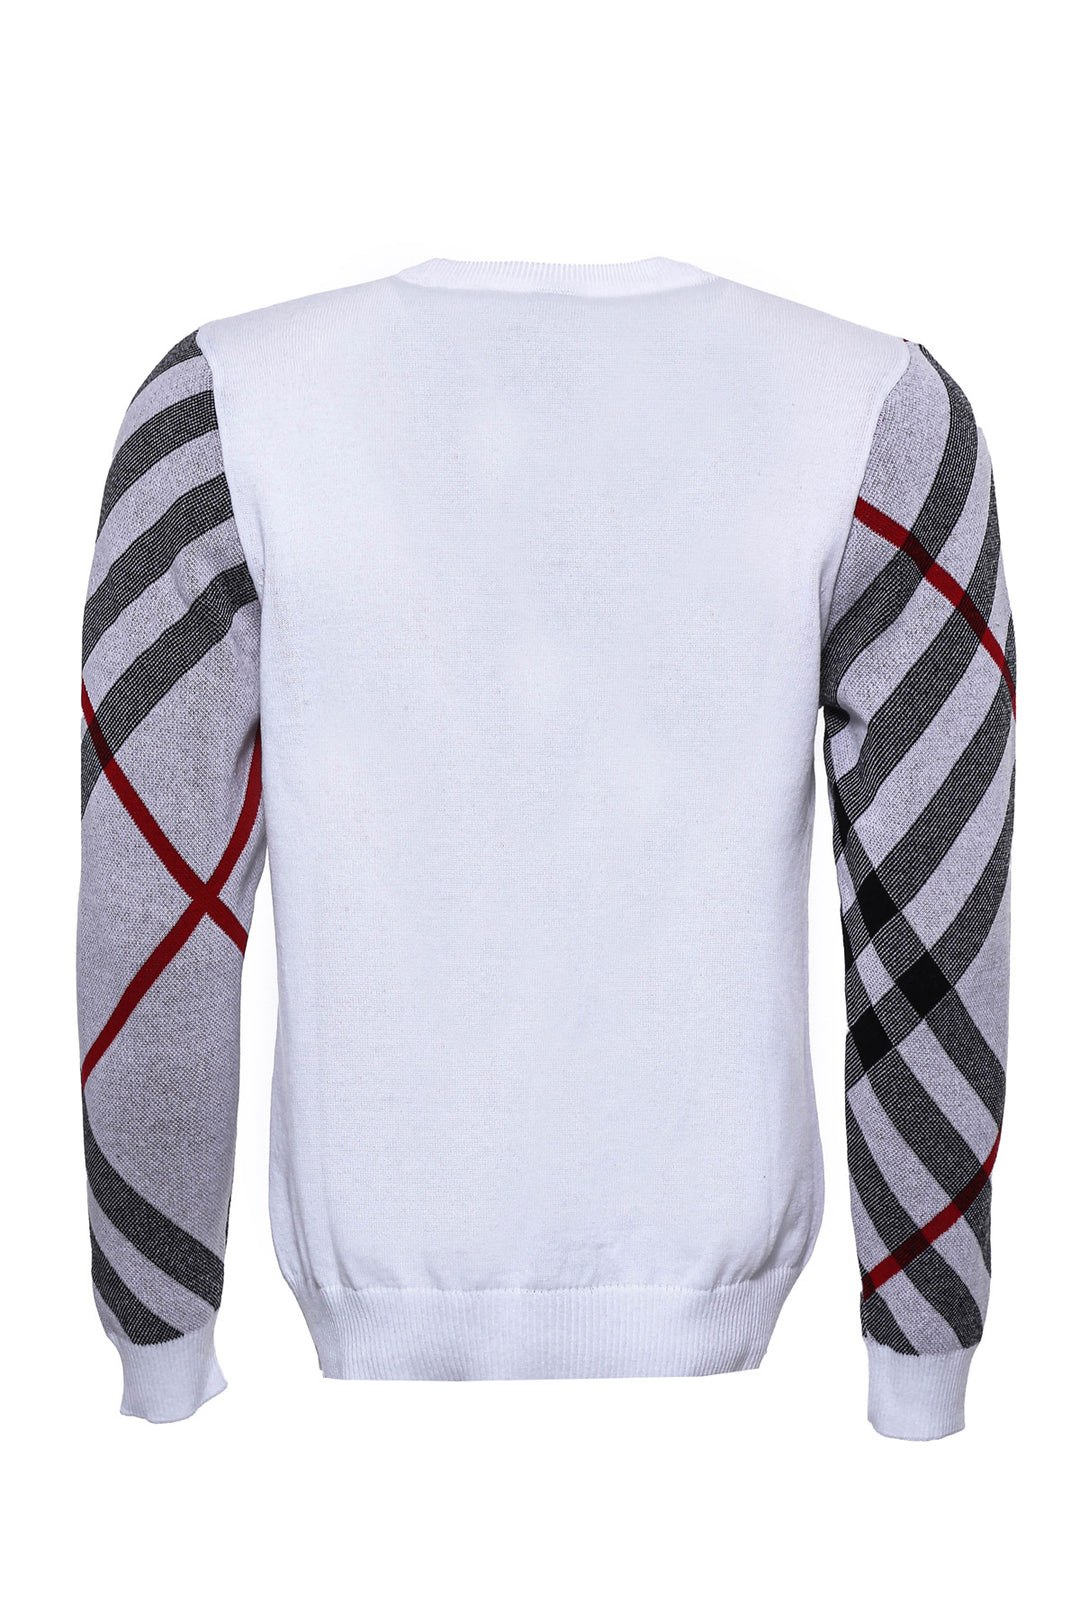 Crew Neck Knitwear Patterned White - Wessi